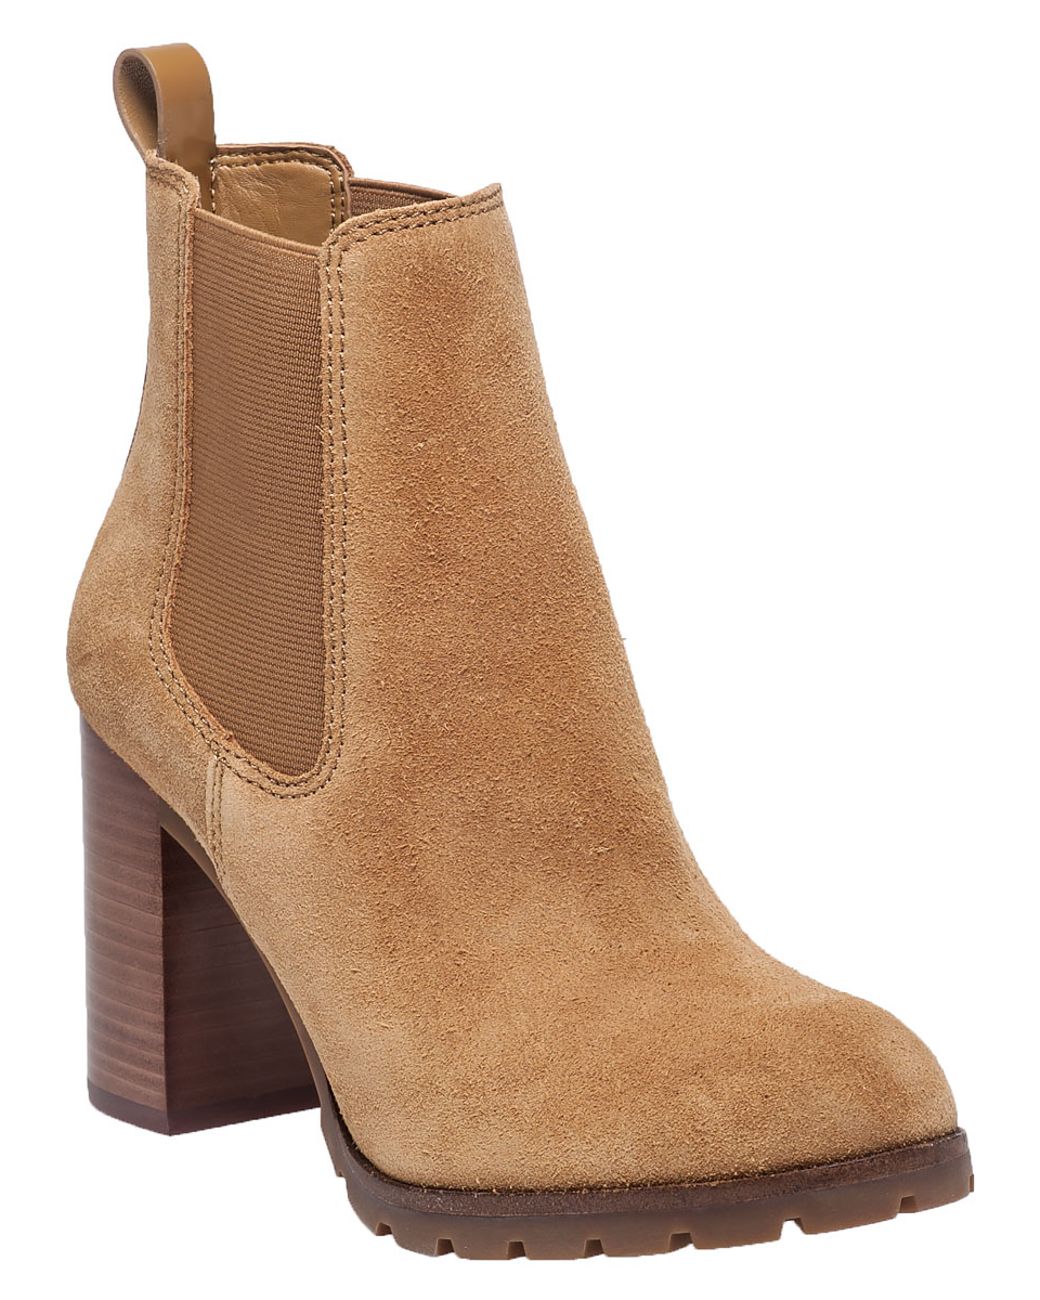 Tory Burch Stafford Suede Ankle Boots in Brown | Lyst